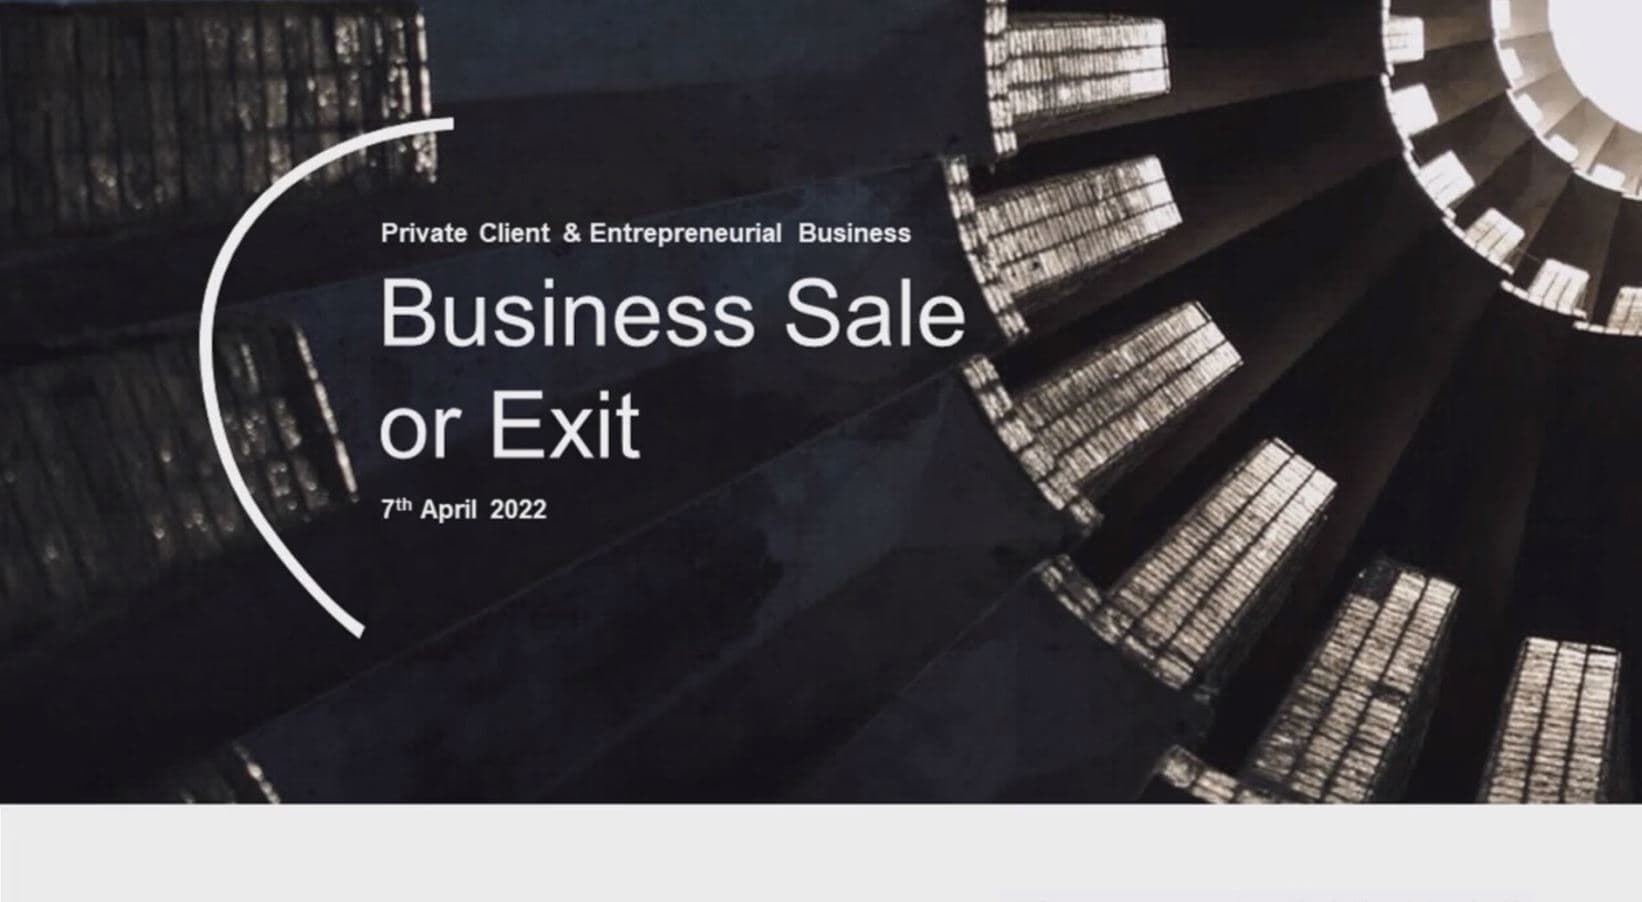 Private Client & Entrepreneurial Business: Business Sale or Exit